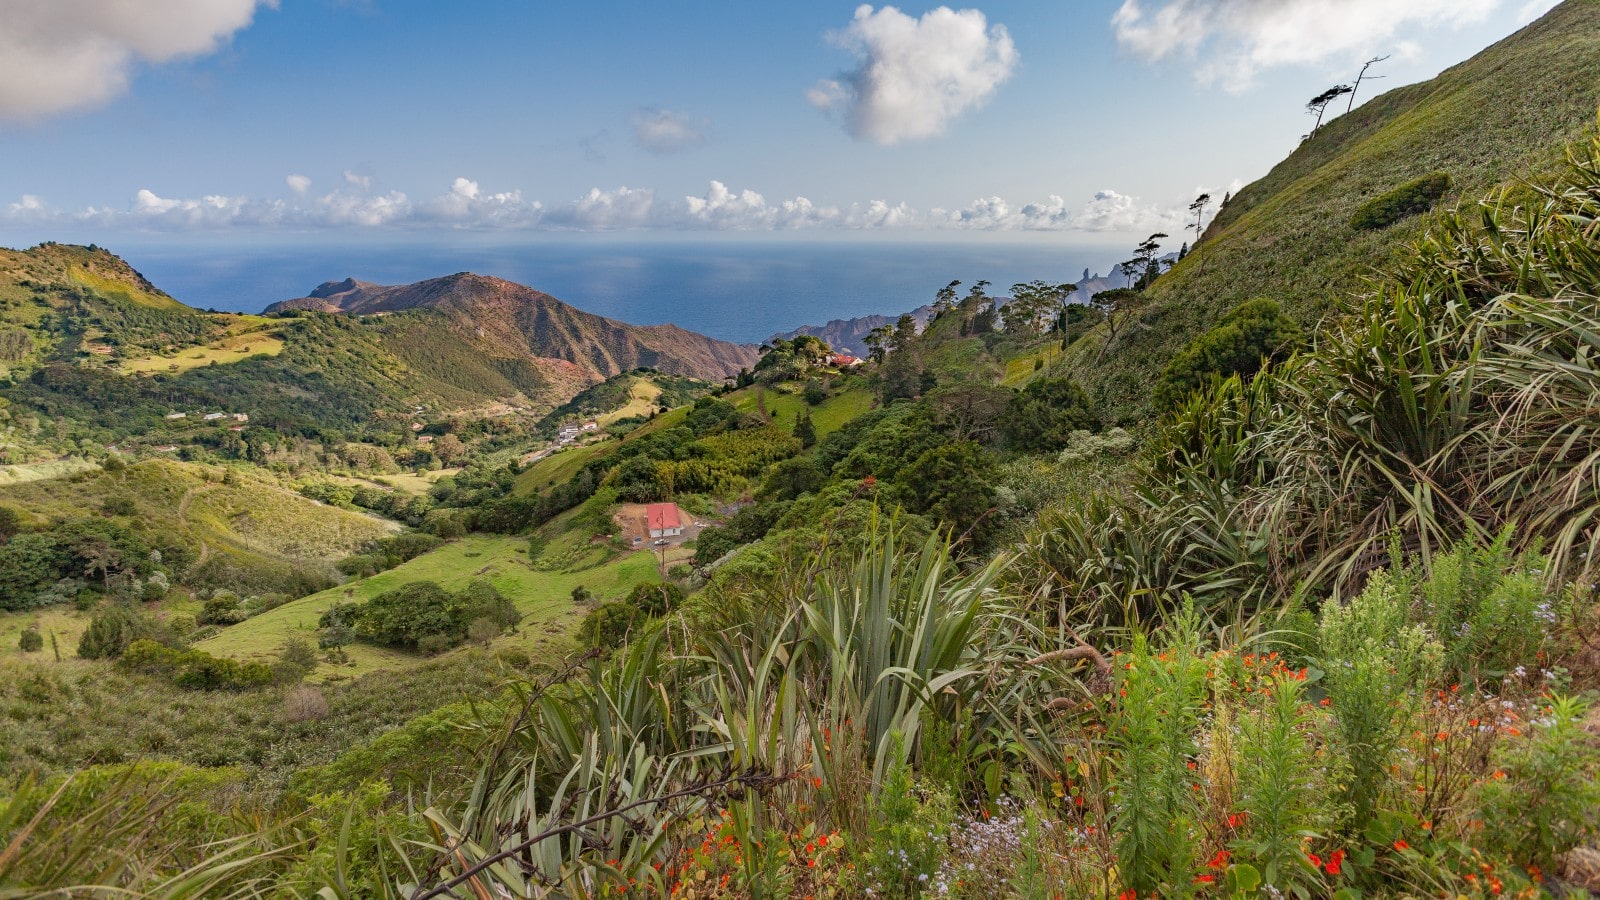 st helena island - - most remote places on earth